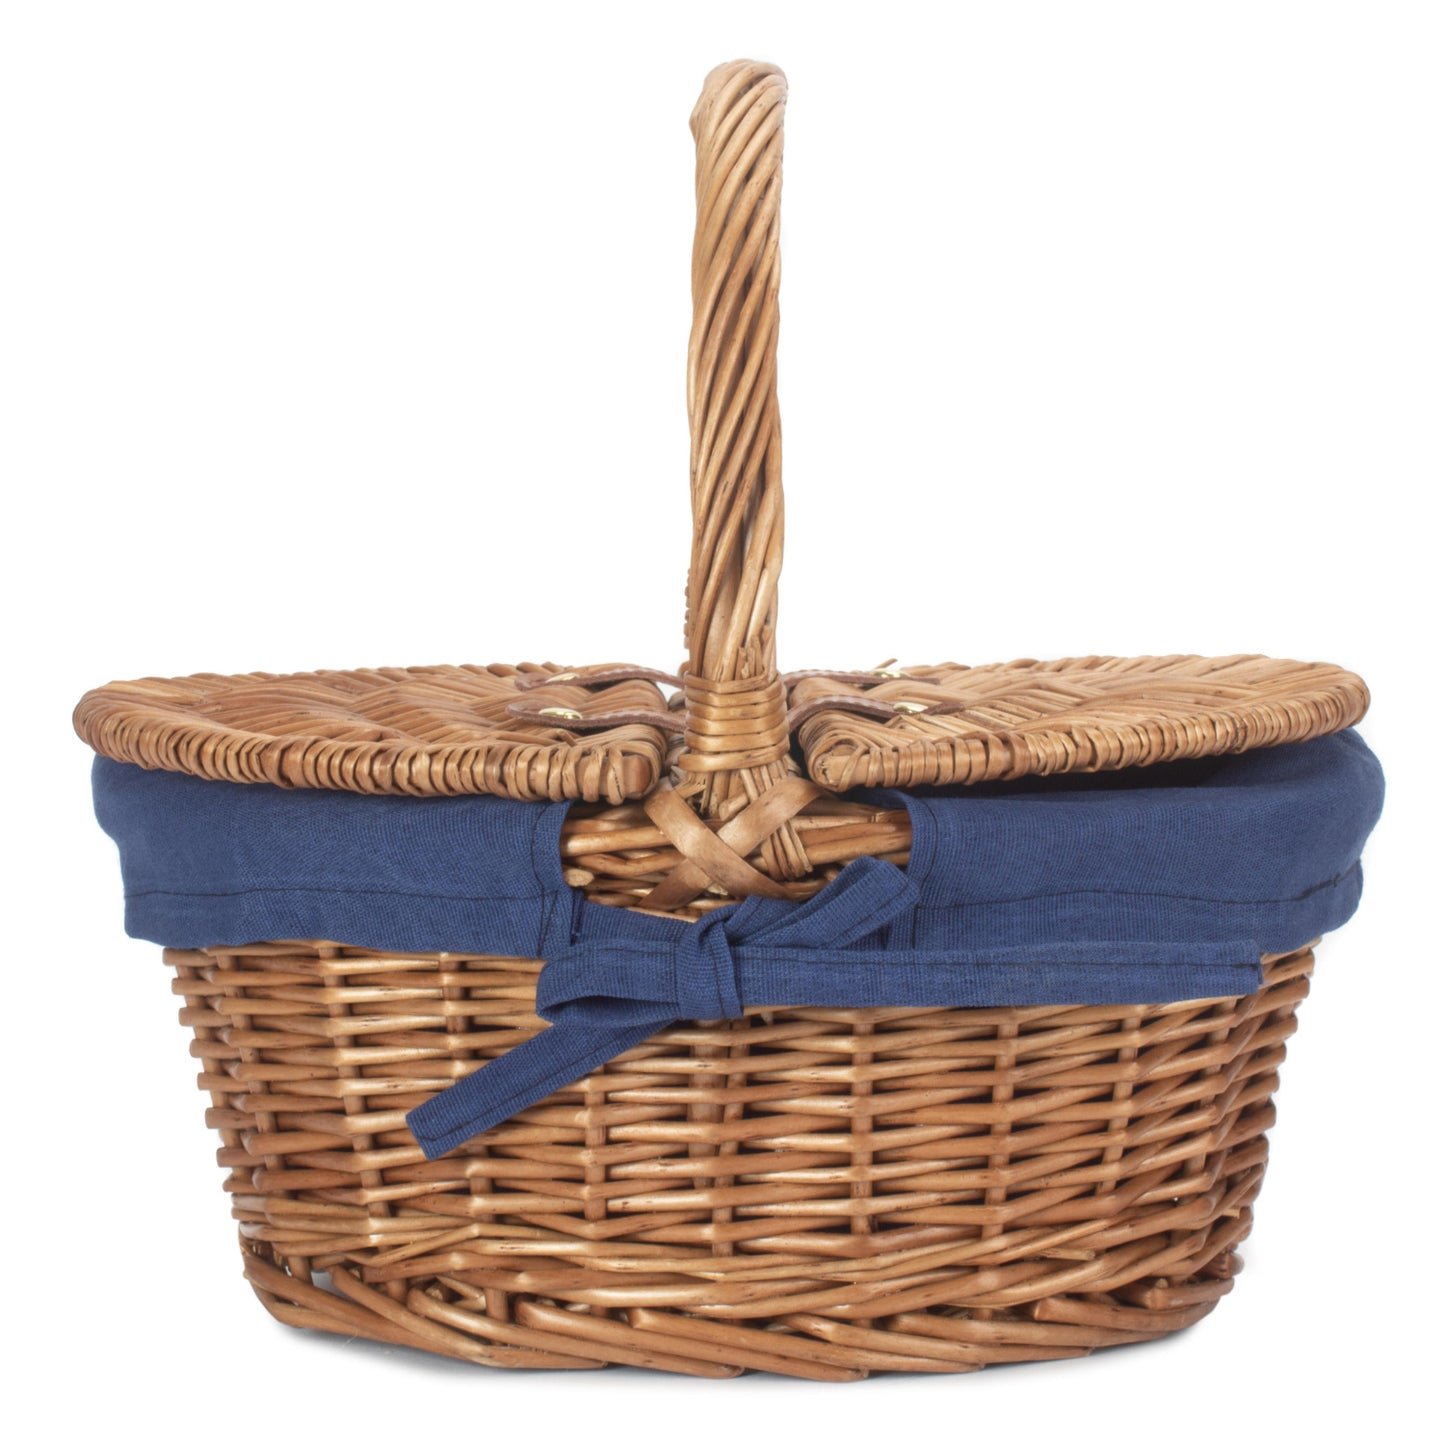 Child's Light Steamed Finish Oval Picnic Basket With Navy Blue Lining